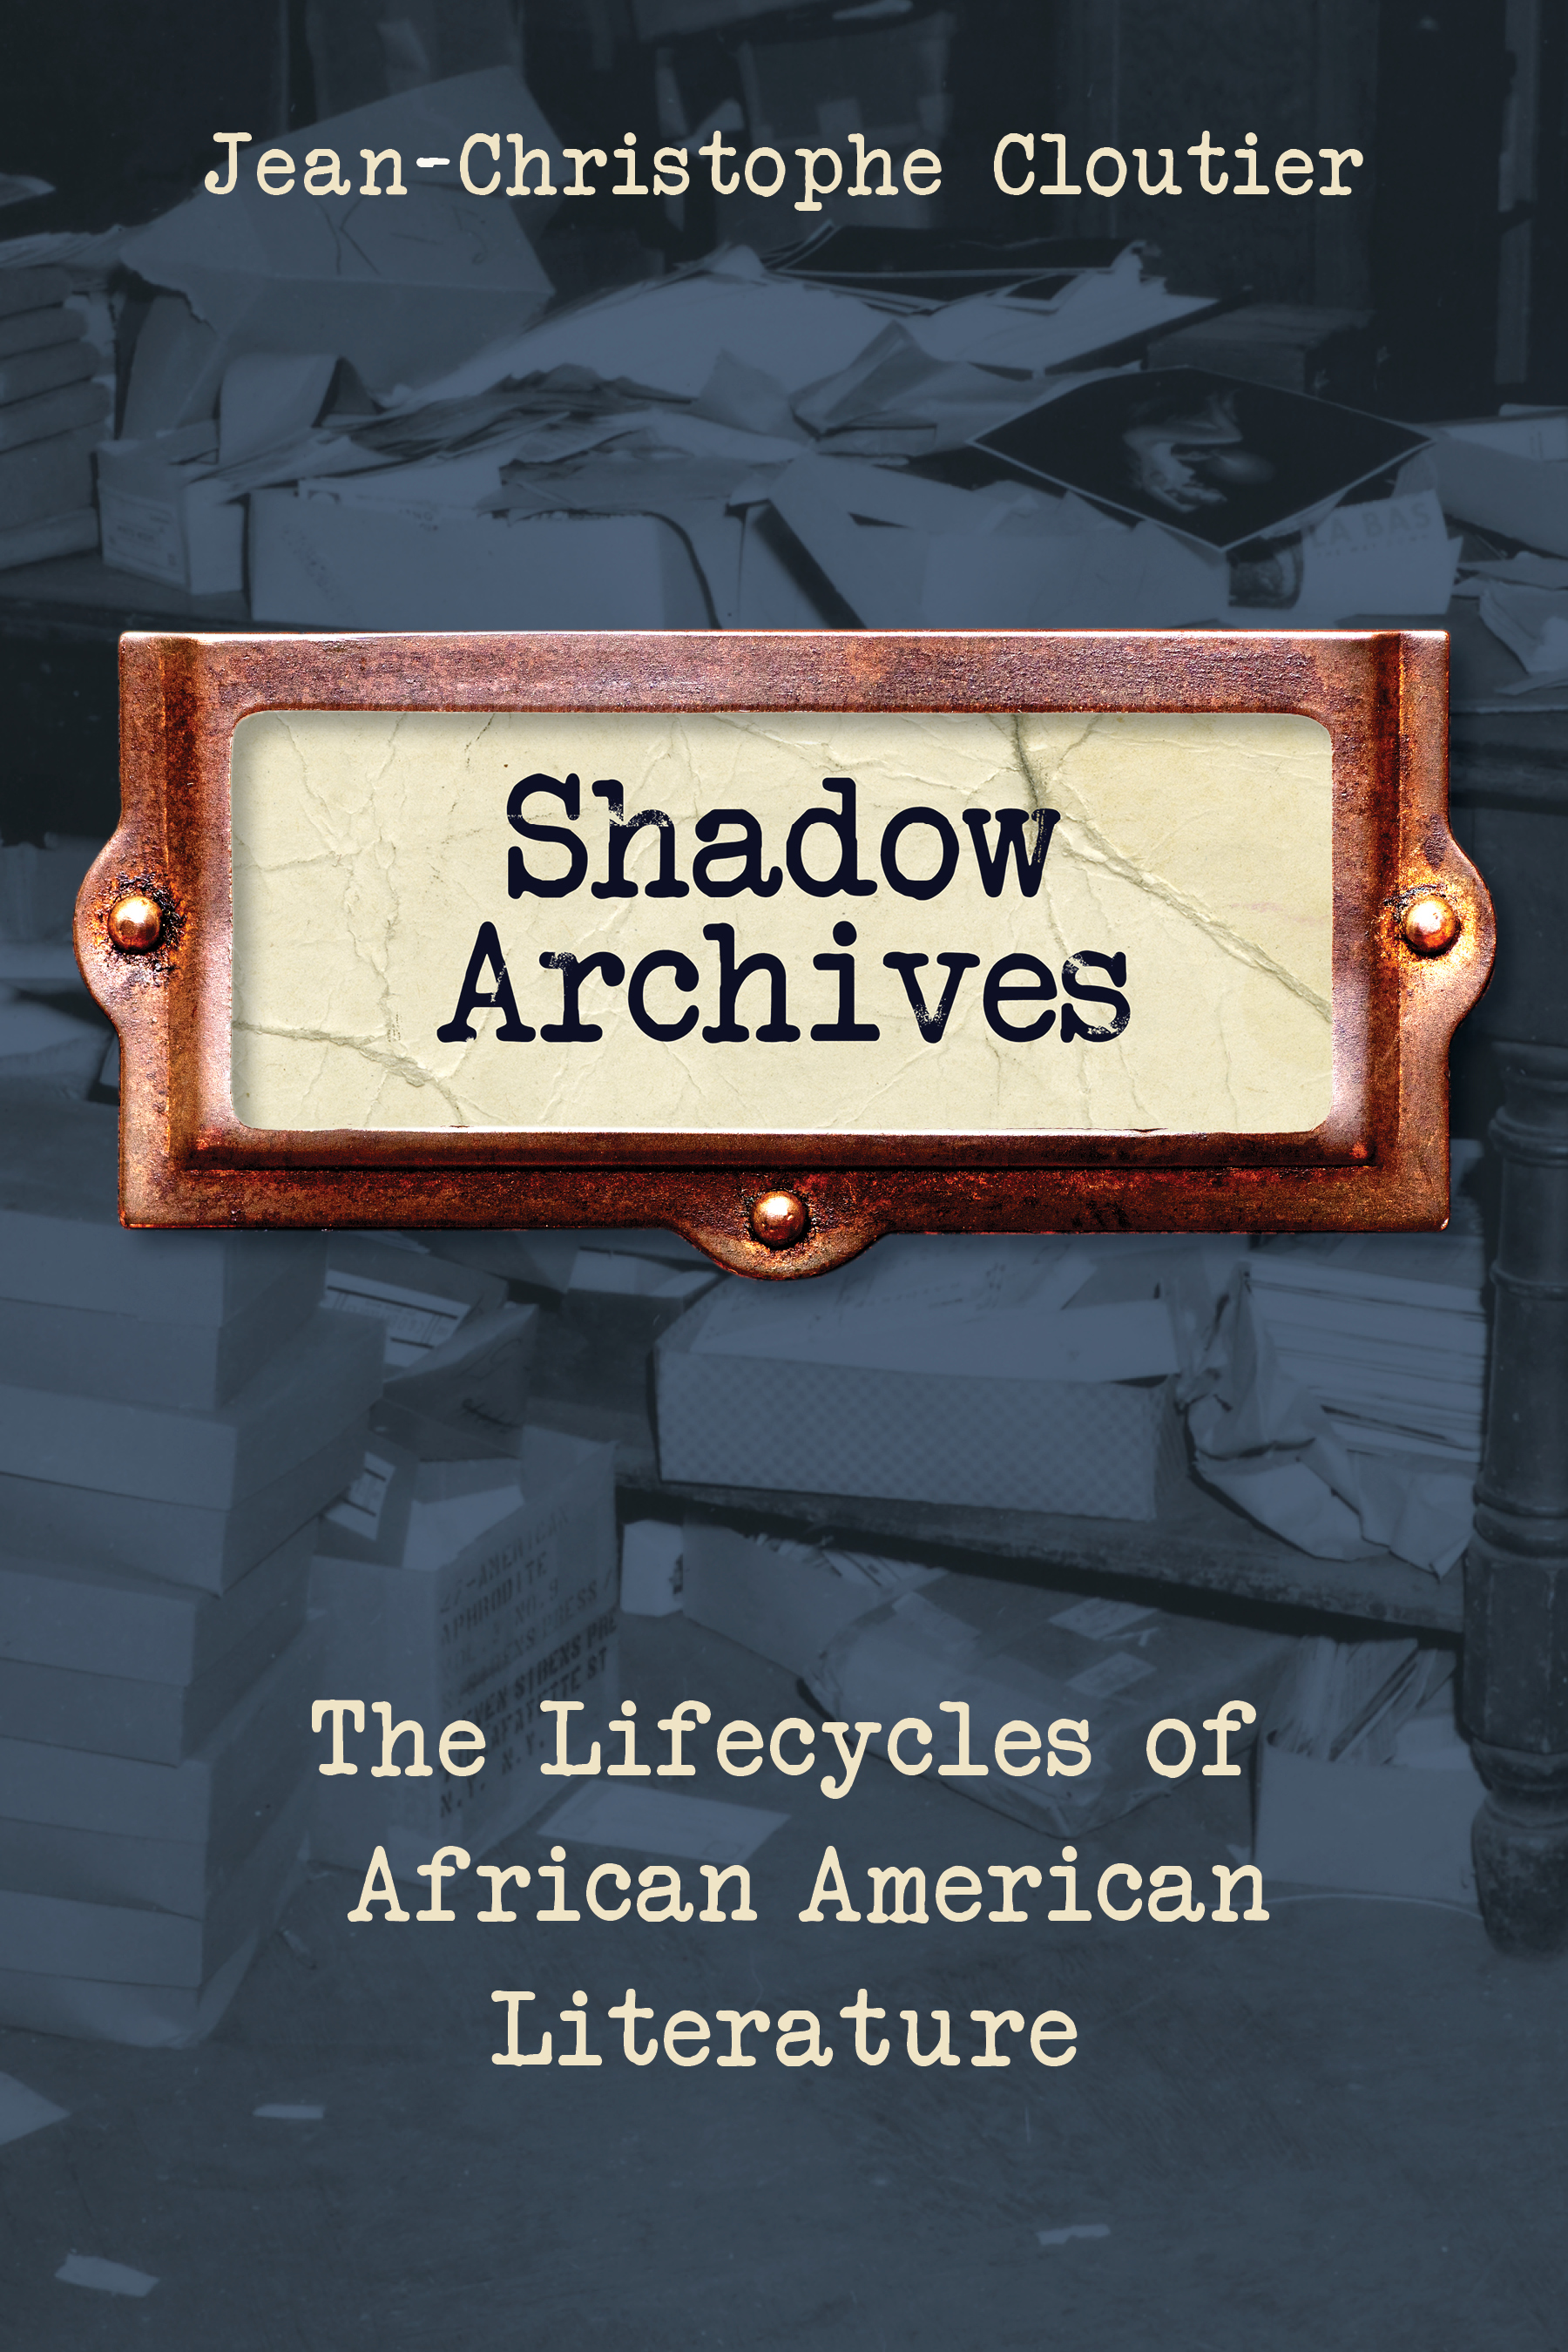 Cover of book Shadow Archives The Lifecycles of African American Literature Jean-Christophe Cloutier 